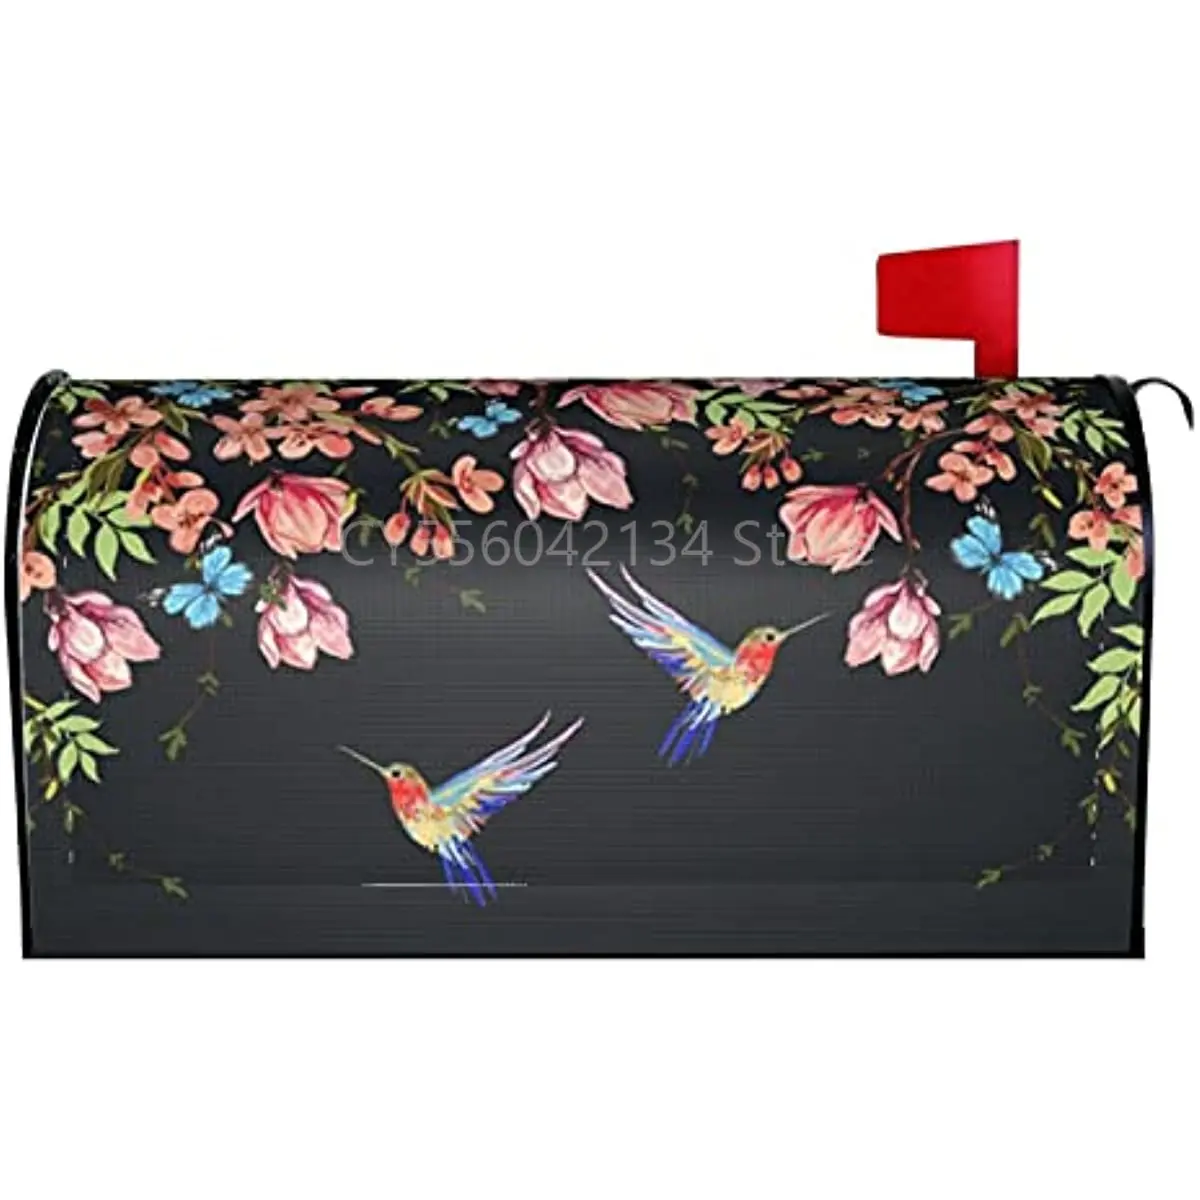 

Hummingbird Flowers Butterflies Mailbox Covers Magnetic Waterproof Mail Cover Letter Post Box Wraps for Home Garden Yard Decor